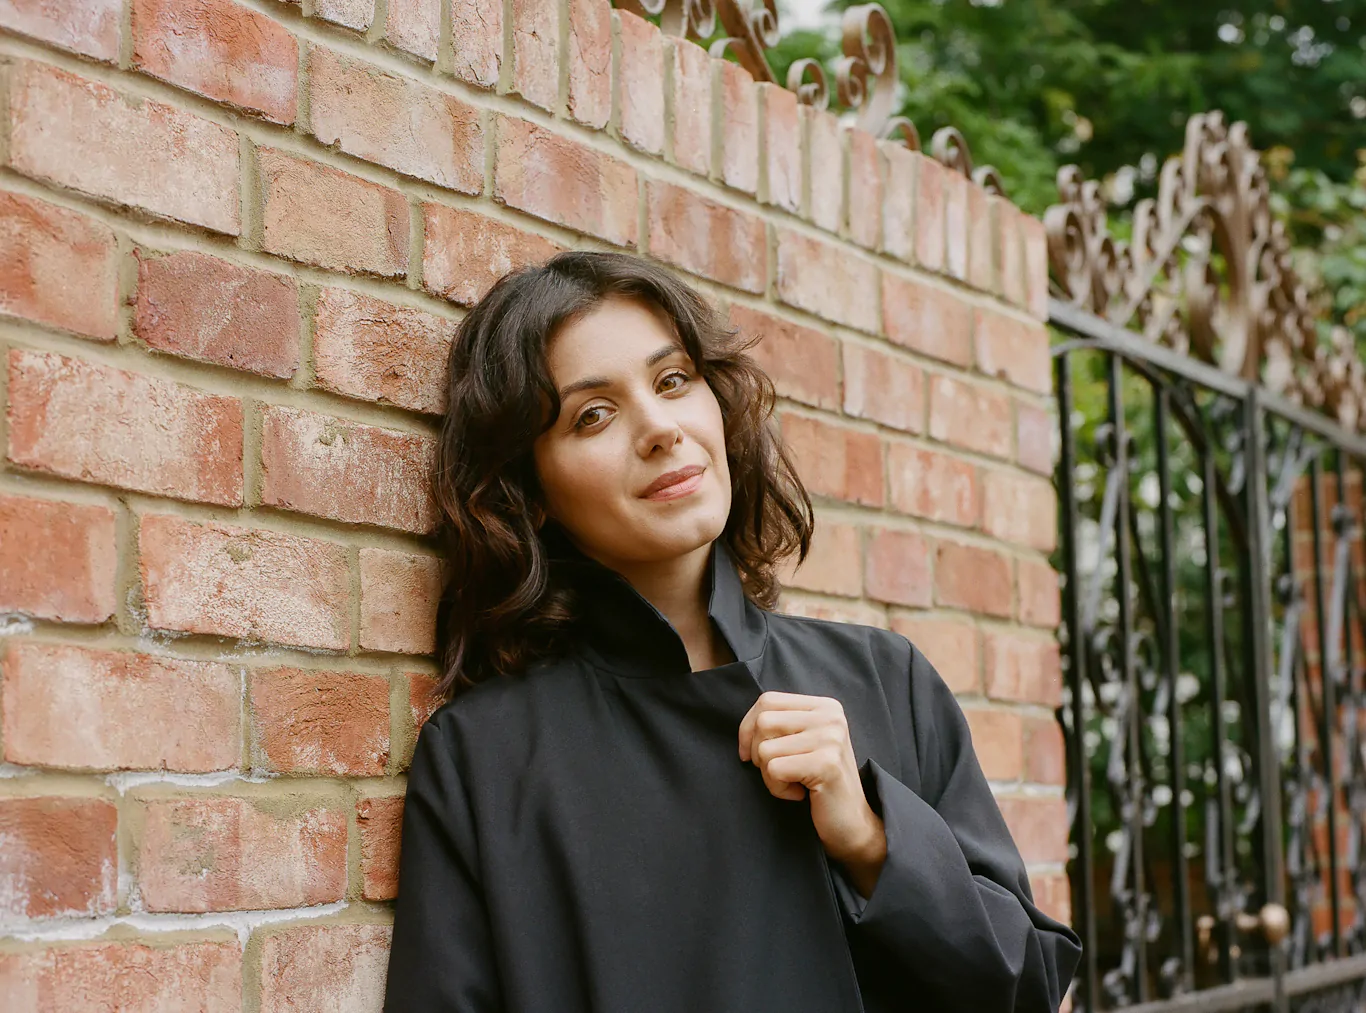 KATIE MELUA announces ‘Acoustic Album No. 8’ – a collection of acoustic reworkings of her acclaimed 2020 release ‘Album No.8’